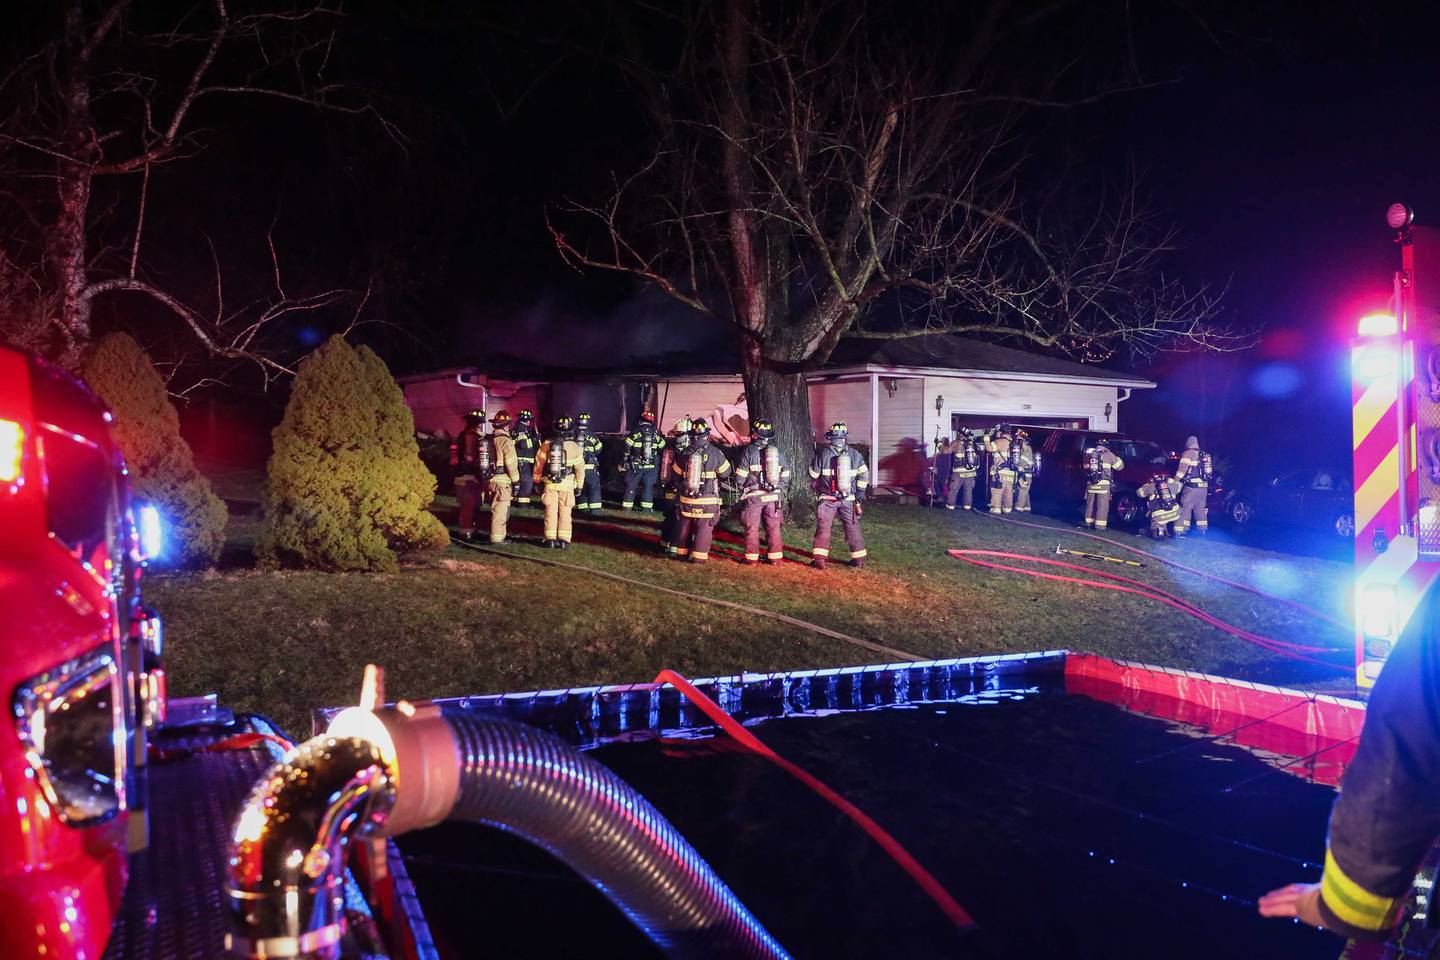 Two adult residents, a cat and a dog died Tuesday morning in a house fire near Union, Marengo Fire and Rescue Districts reports.